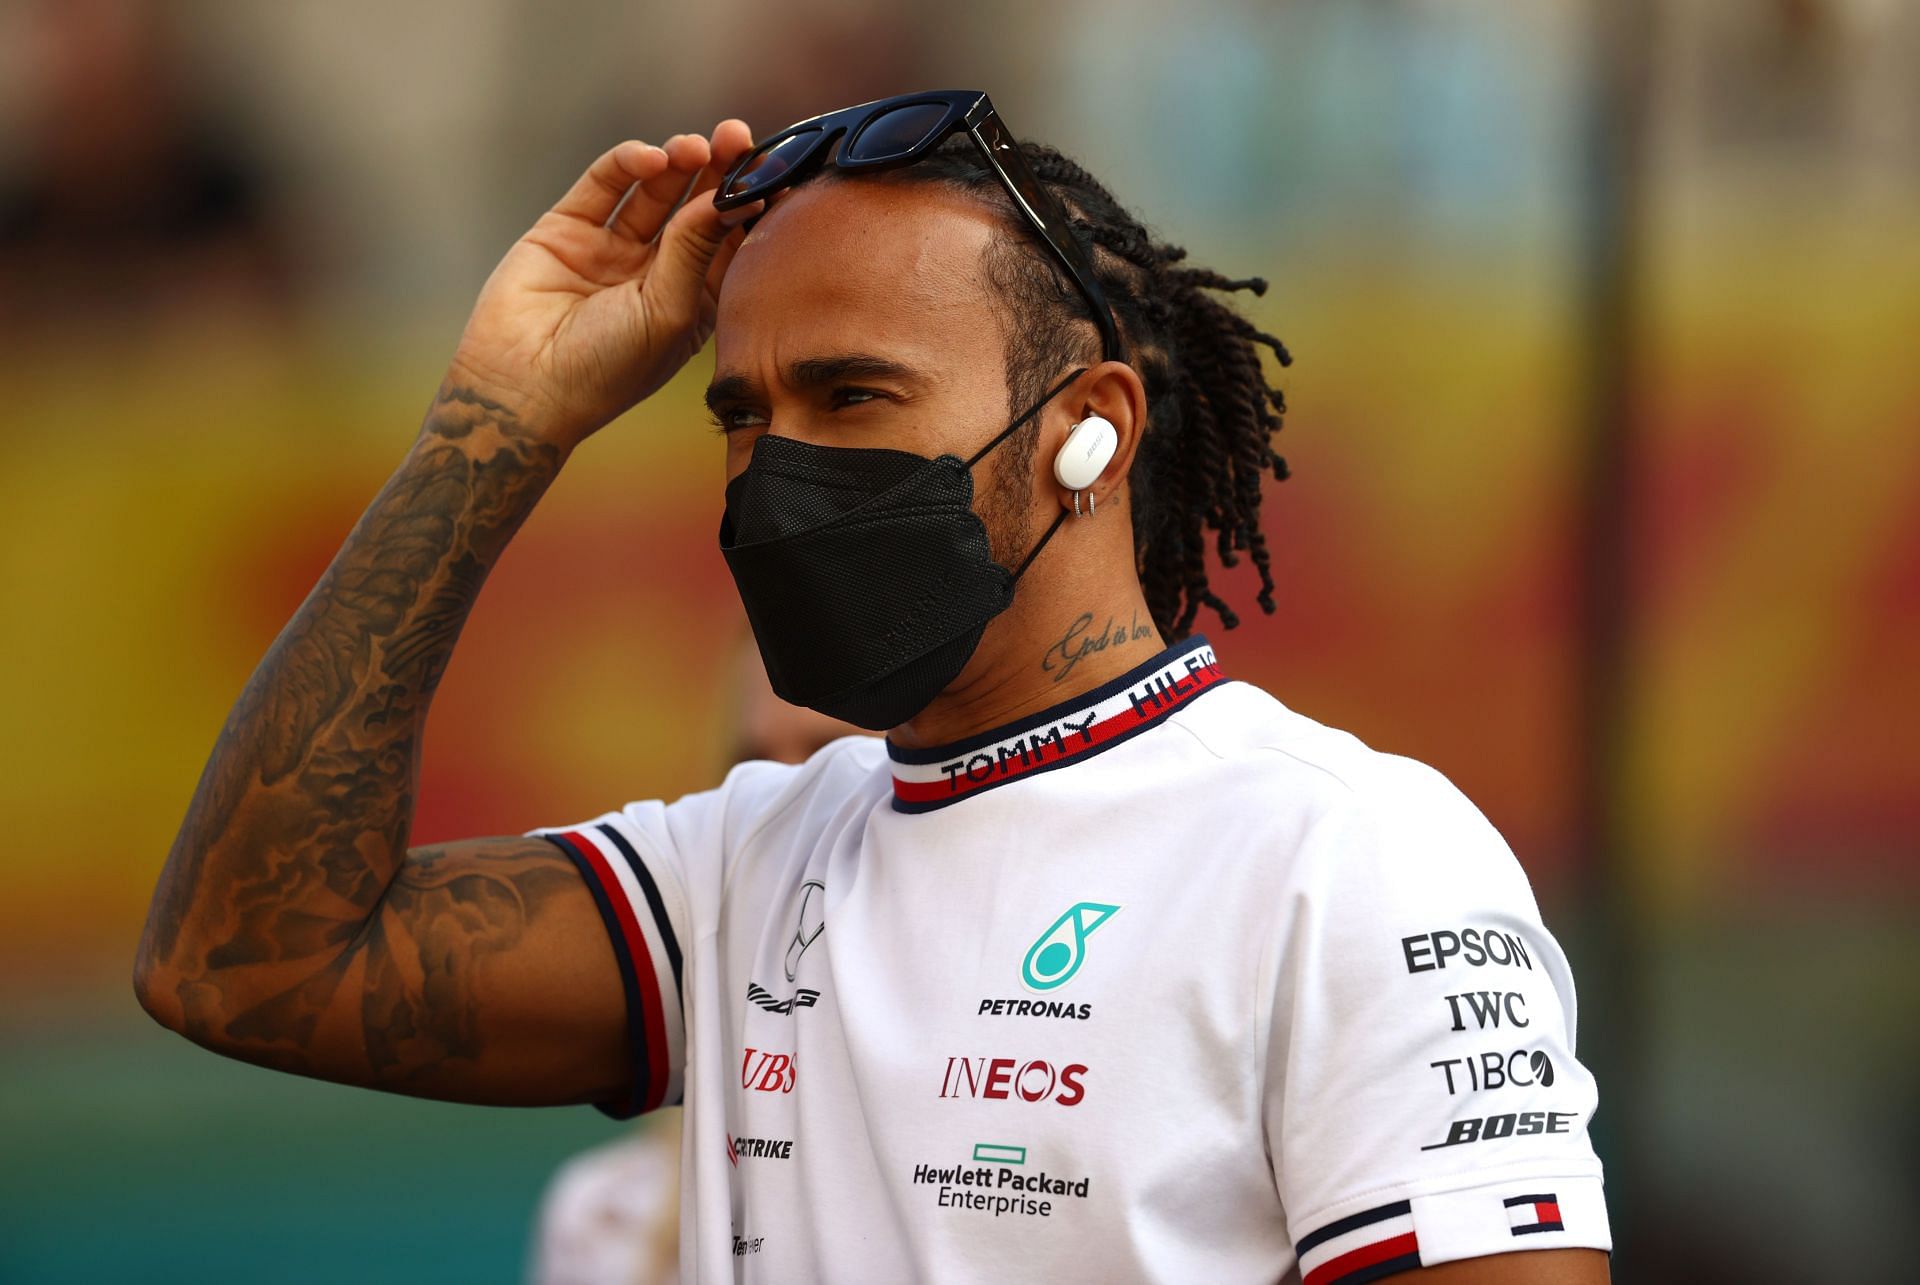 Lewis Hamilton has not made a public statement since the F1 2021 season finale (Photo by Clive Rose/Getty Images)